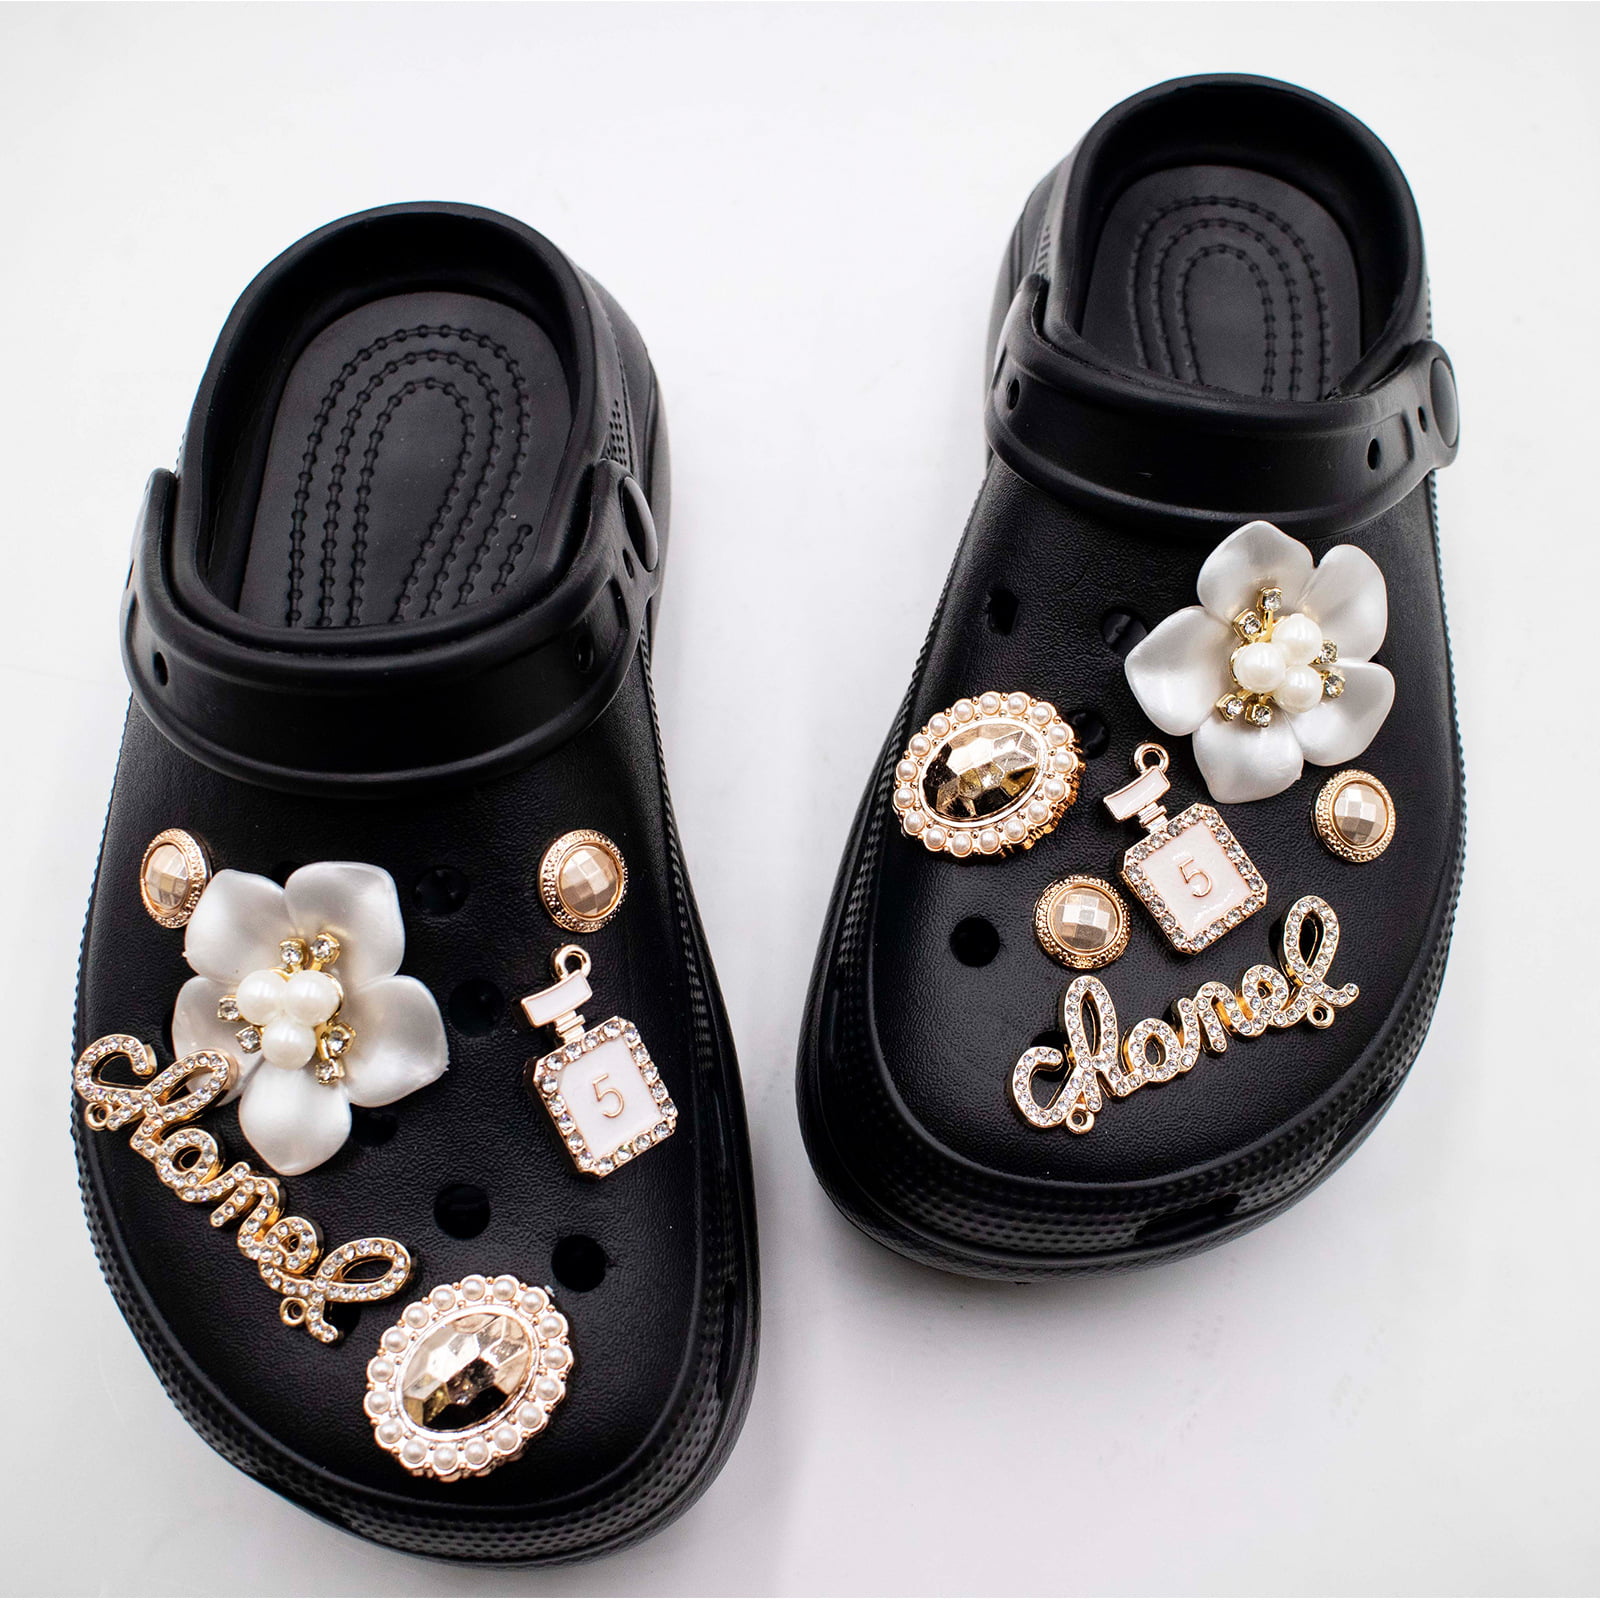 50PCS Black Girl Magic Shoe Decorations Charms for Women Adults Teens Boys Kids Bling Clog Accessories Charms Pins Fit for Garden Sandals Wristband Bracelet Aesthetic Pack 